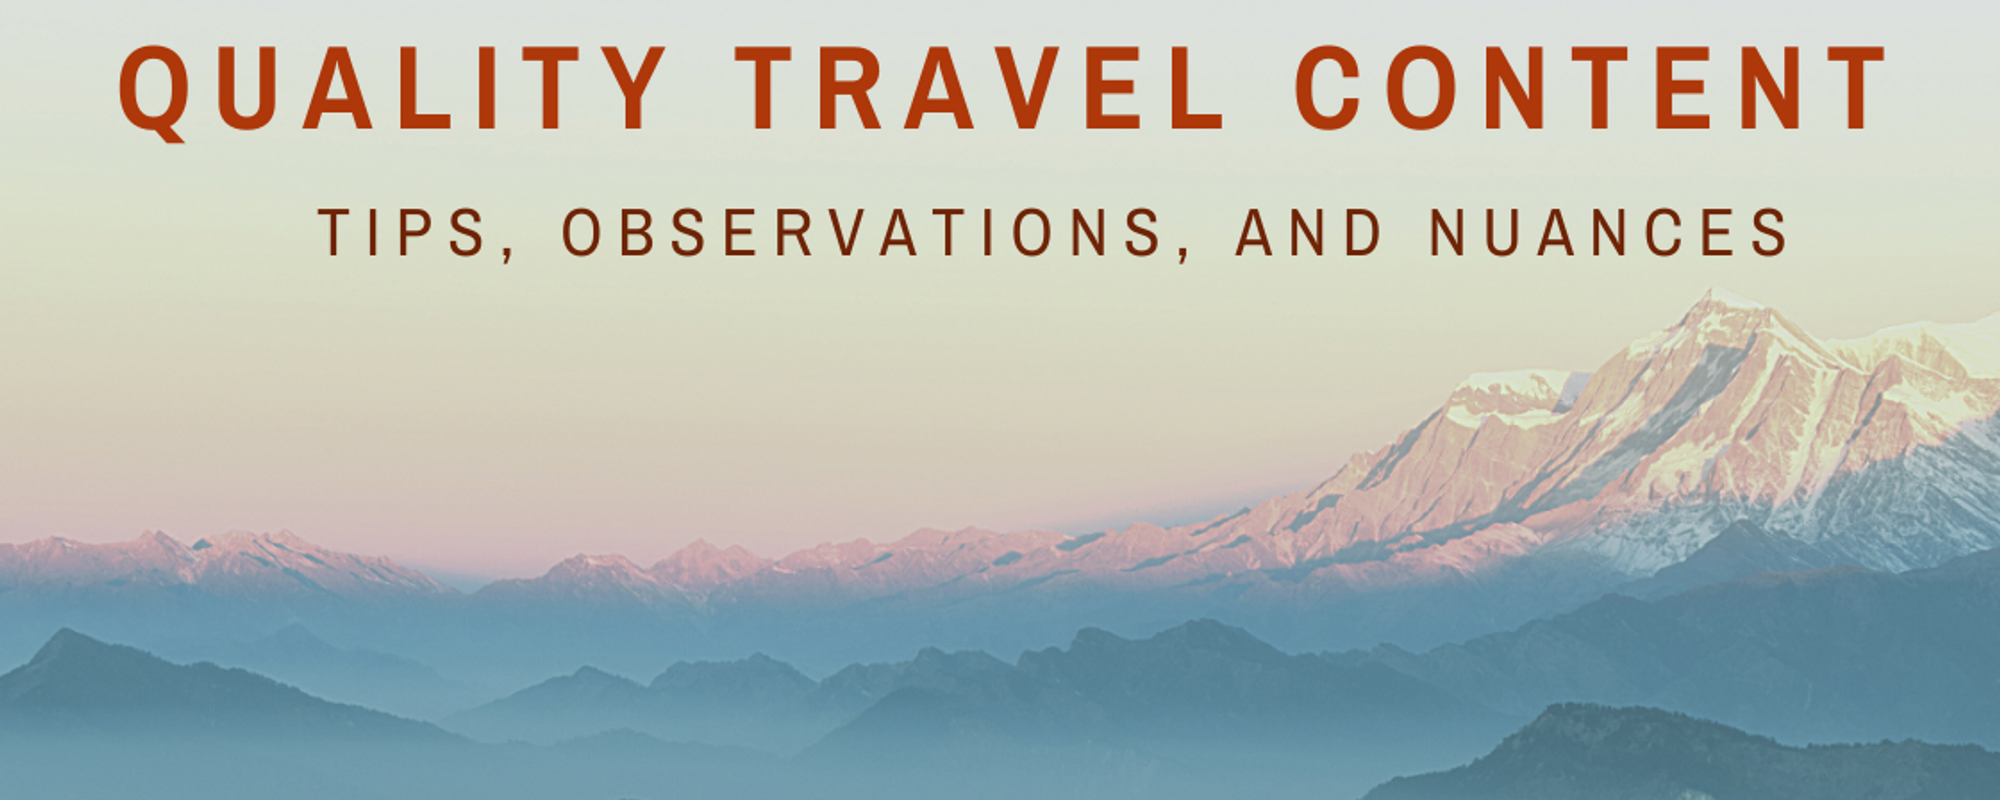 Quality Travel Content: Tips, Observations, and Nuances